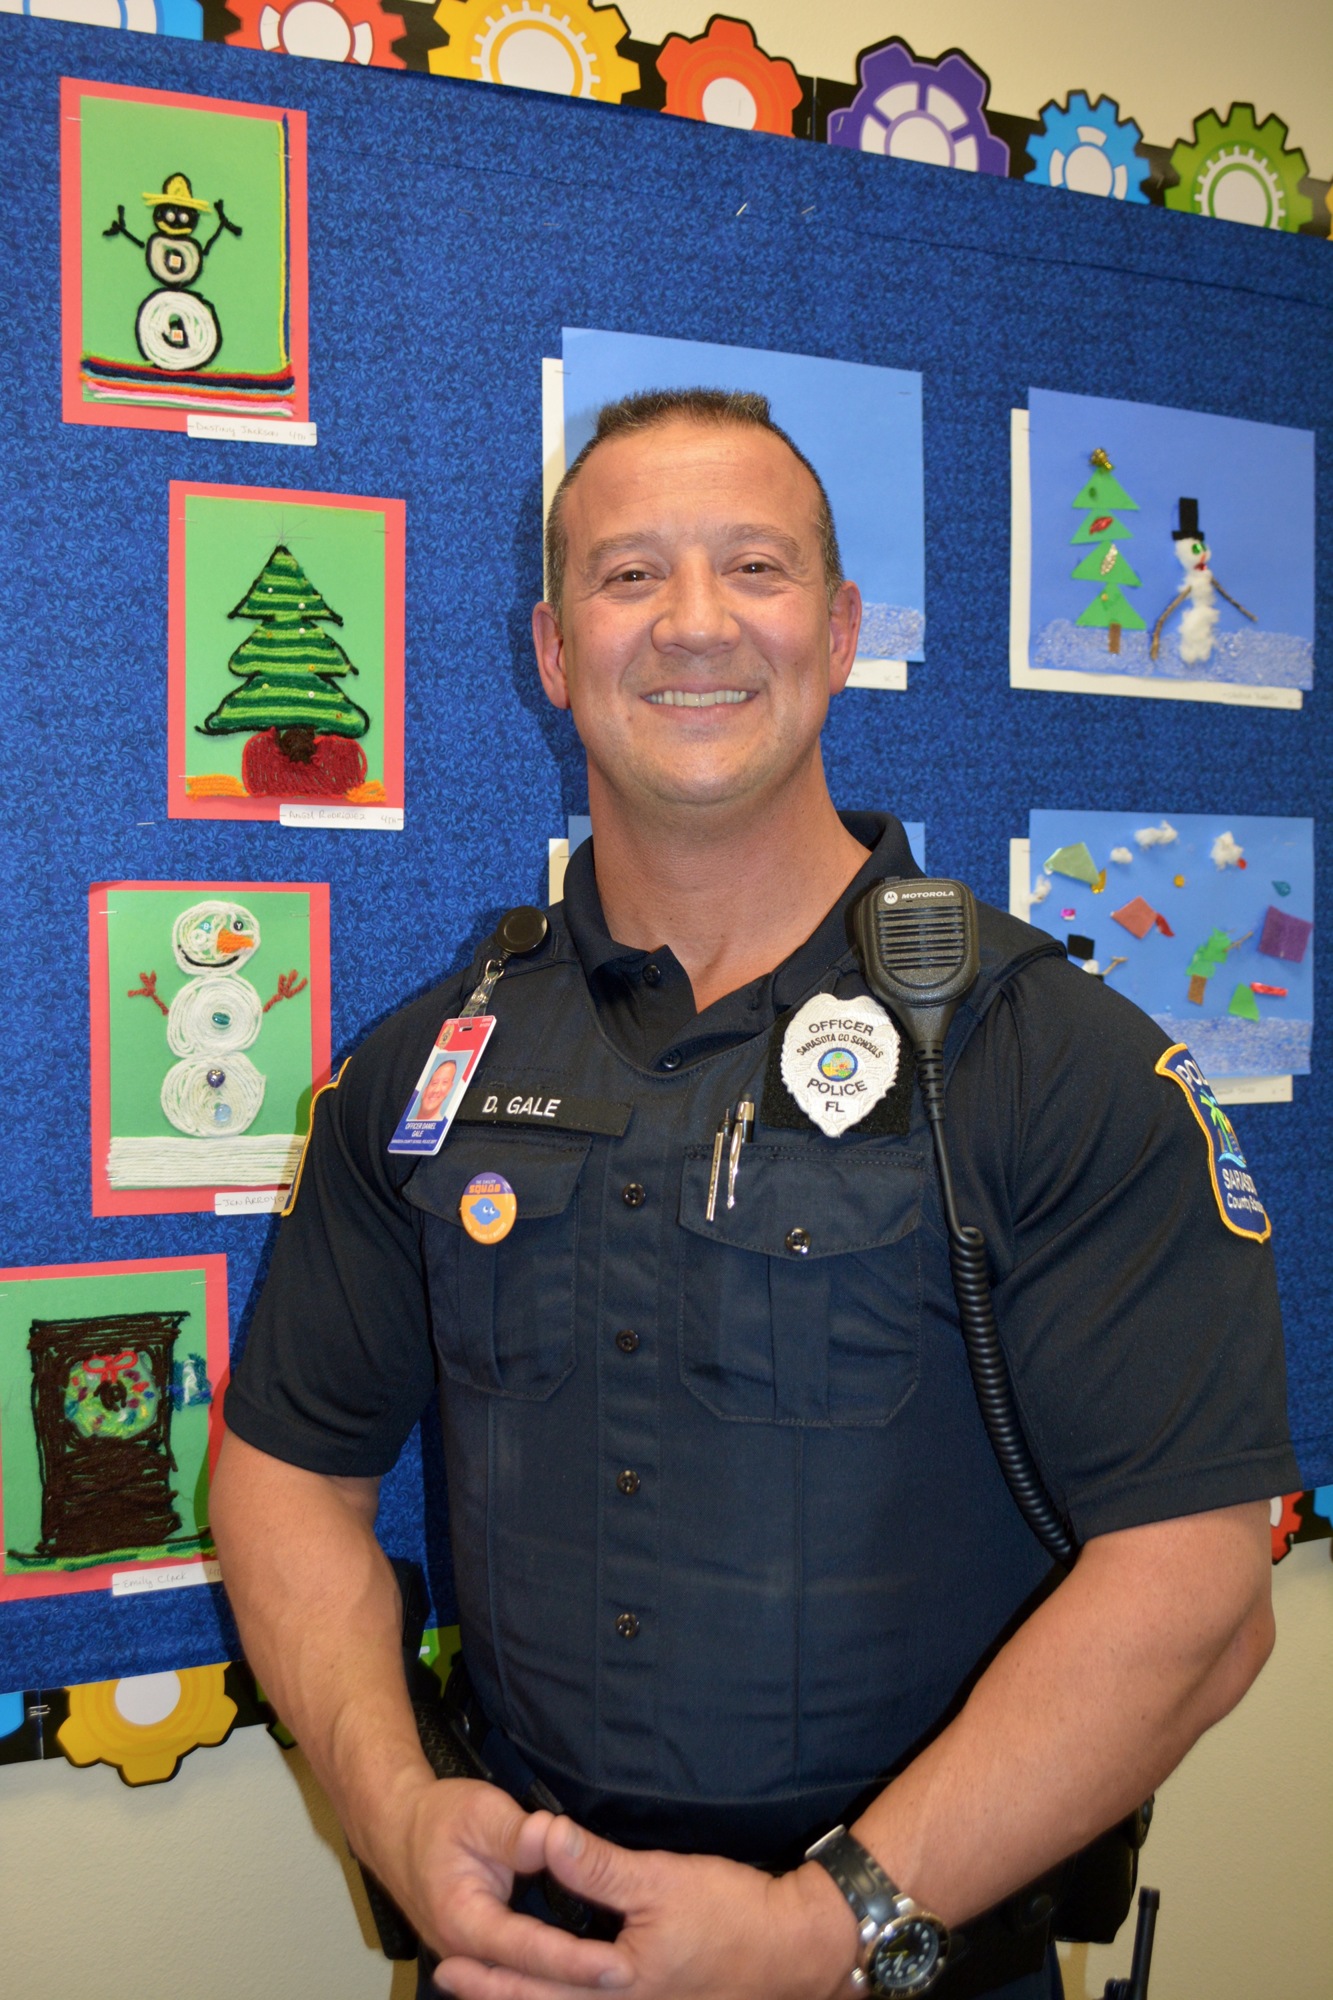 Officer Daniel Gale is the designated school resource officer for Wilkinson Elementary School.